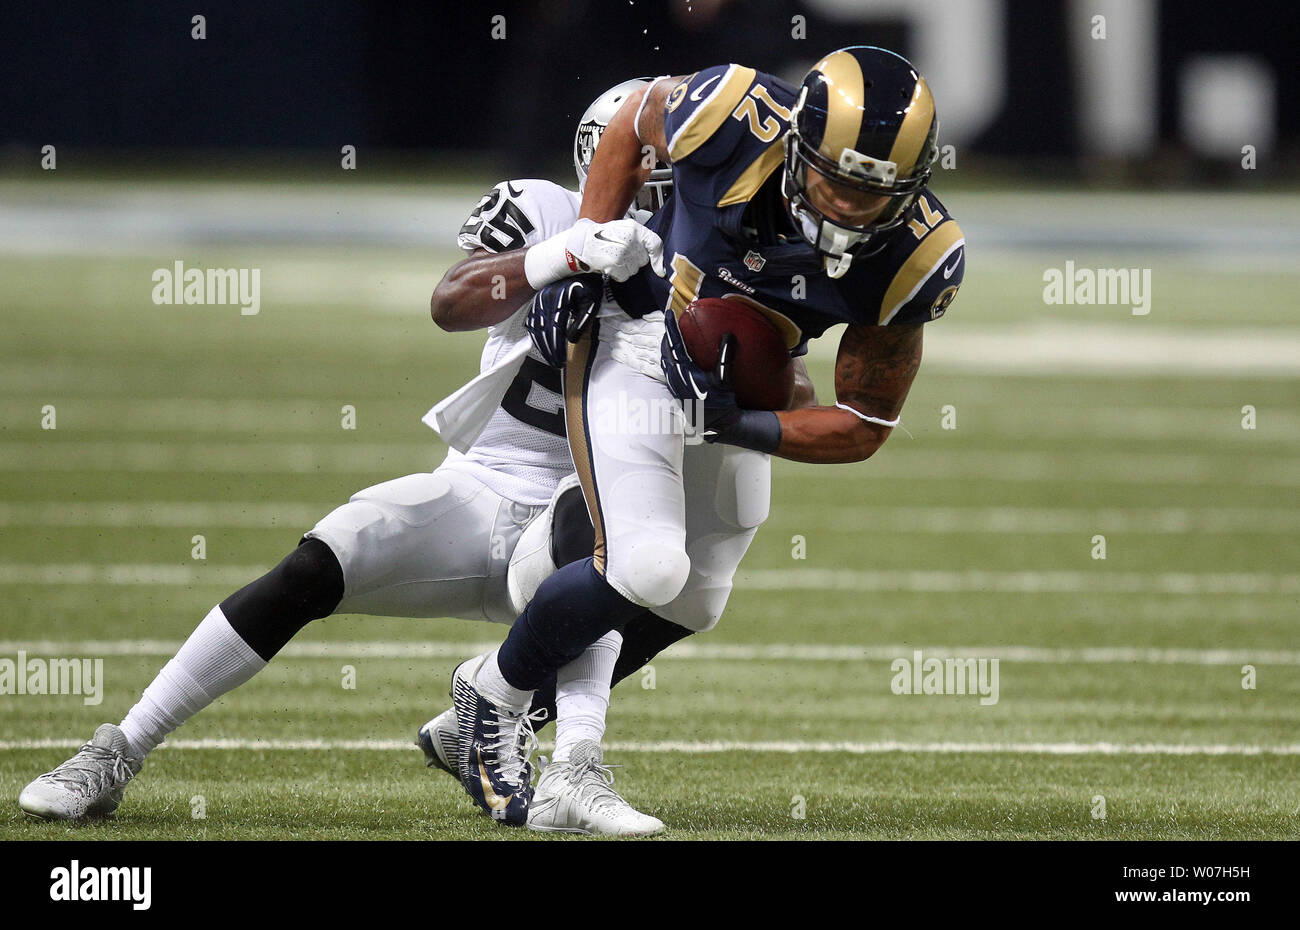 St. Louis Rams Stedman Bailey runs for a 12 yard gain as Oakland Raiders D.J. Hayden tries to drag him down in the first quarter at the Edward Jones Dome in St. Louis on November 30, 2014. St. Louis defeated Oakland 52-0.  UPI/Bill Greenblatt Stock Photo